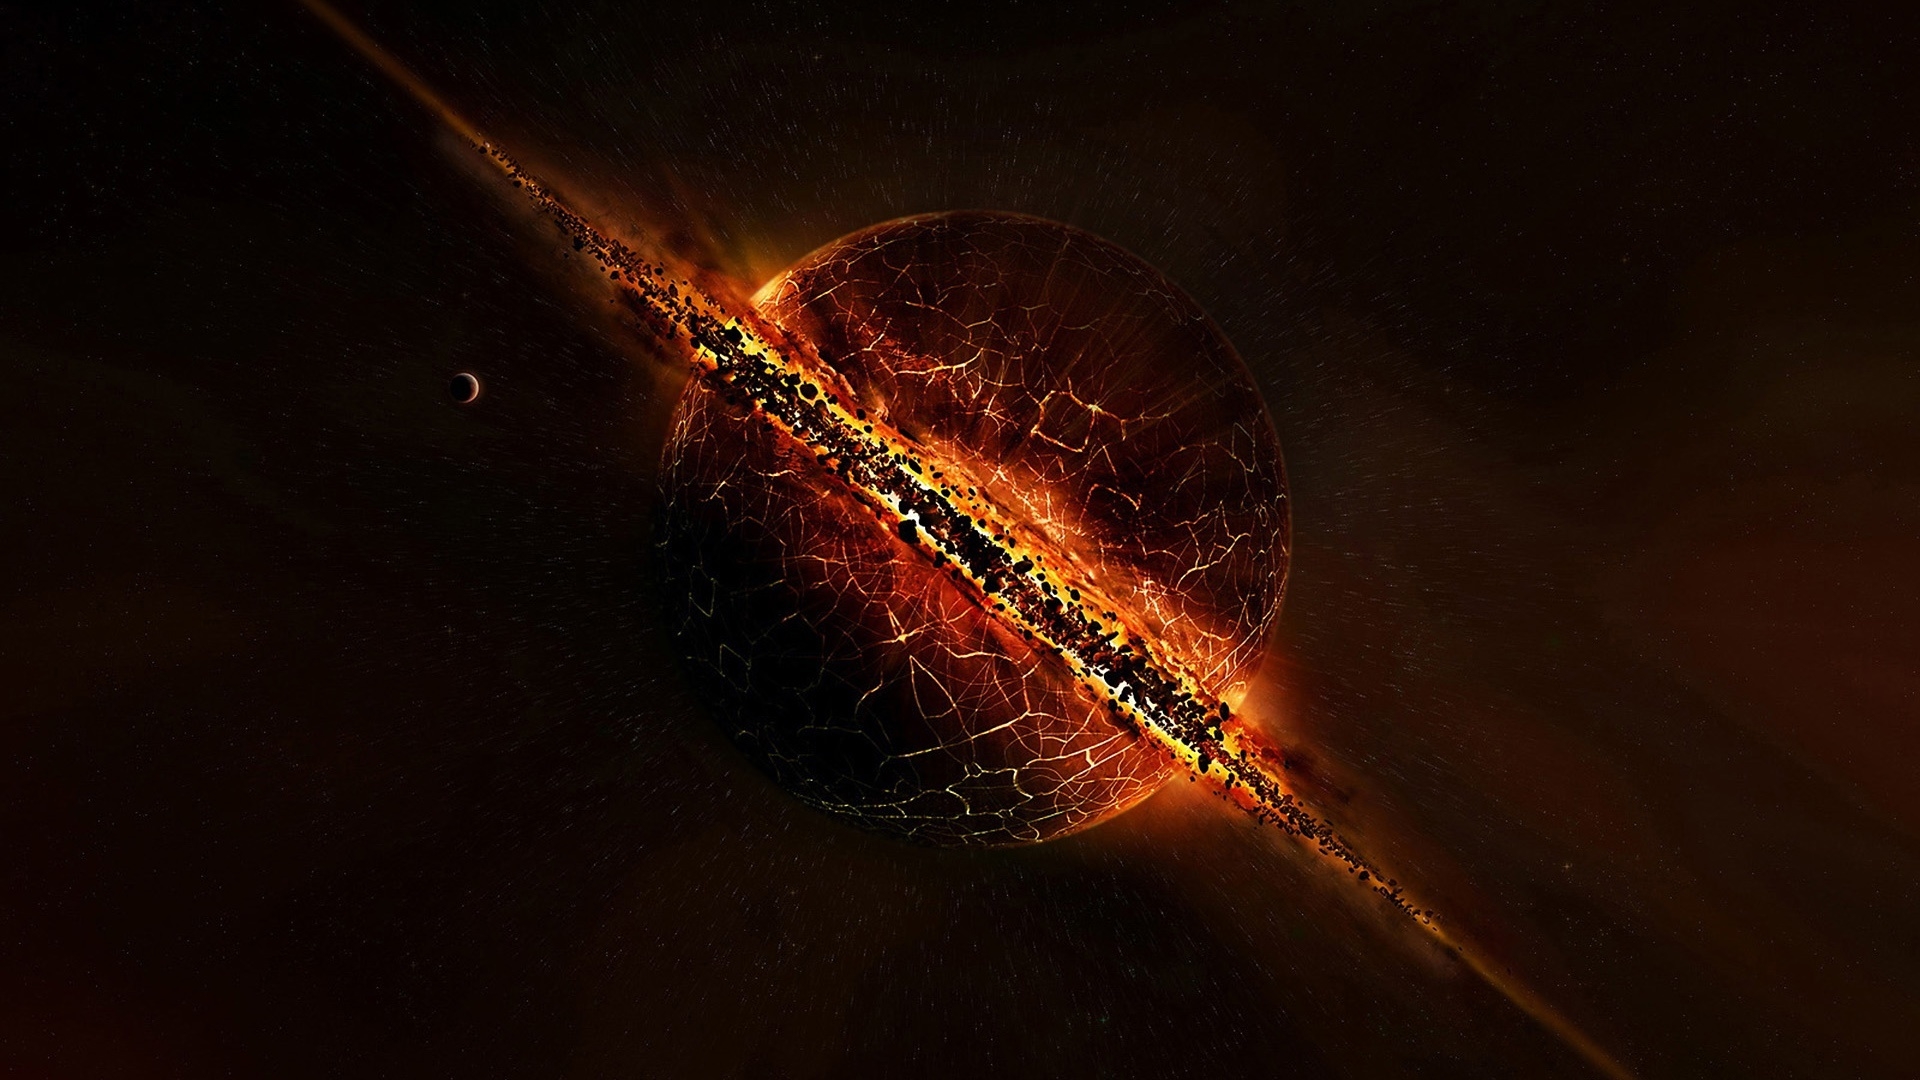 Exploding Planets for 1920 x 1080 HDTV 1080p resolution